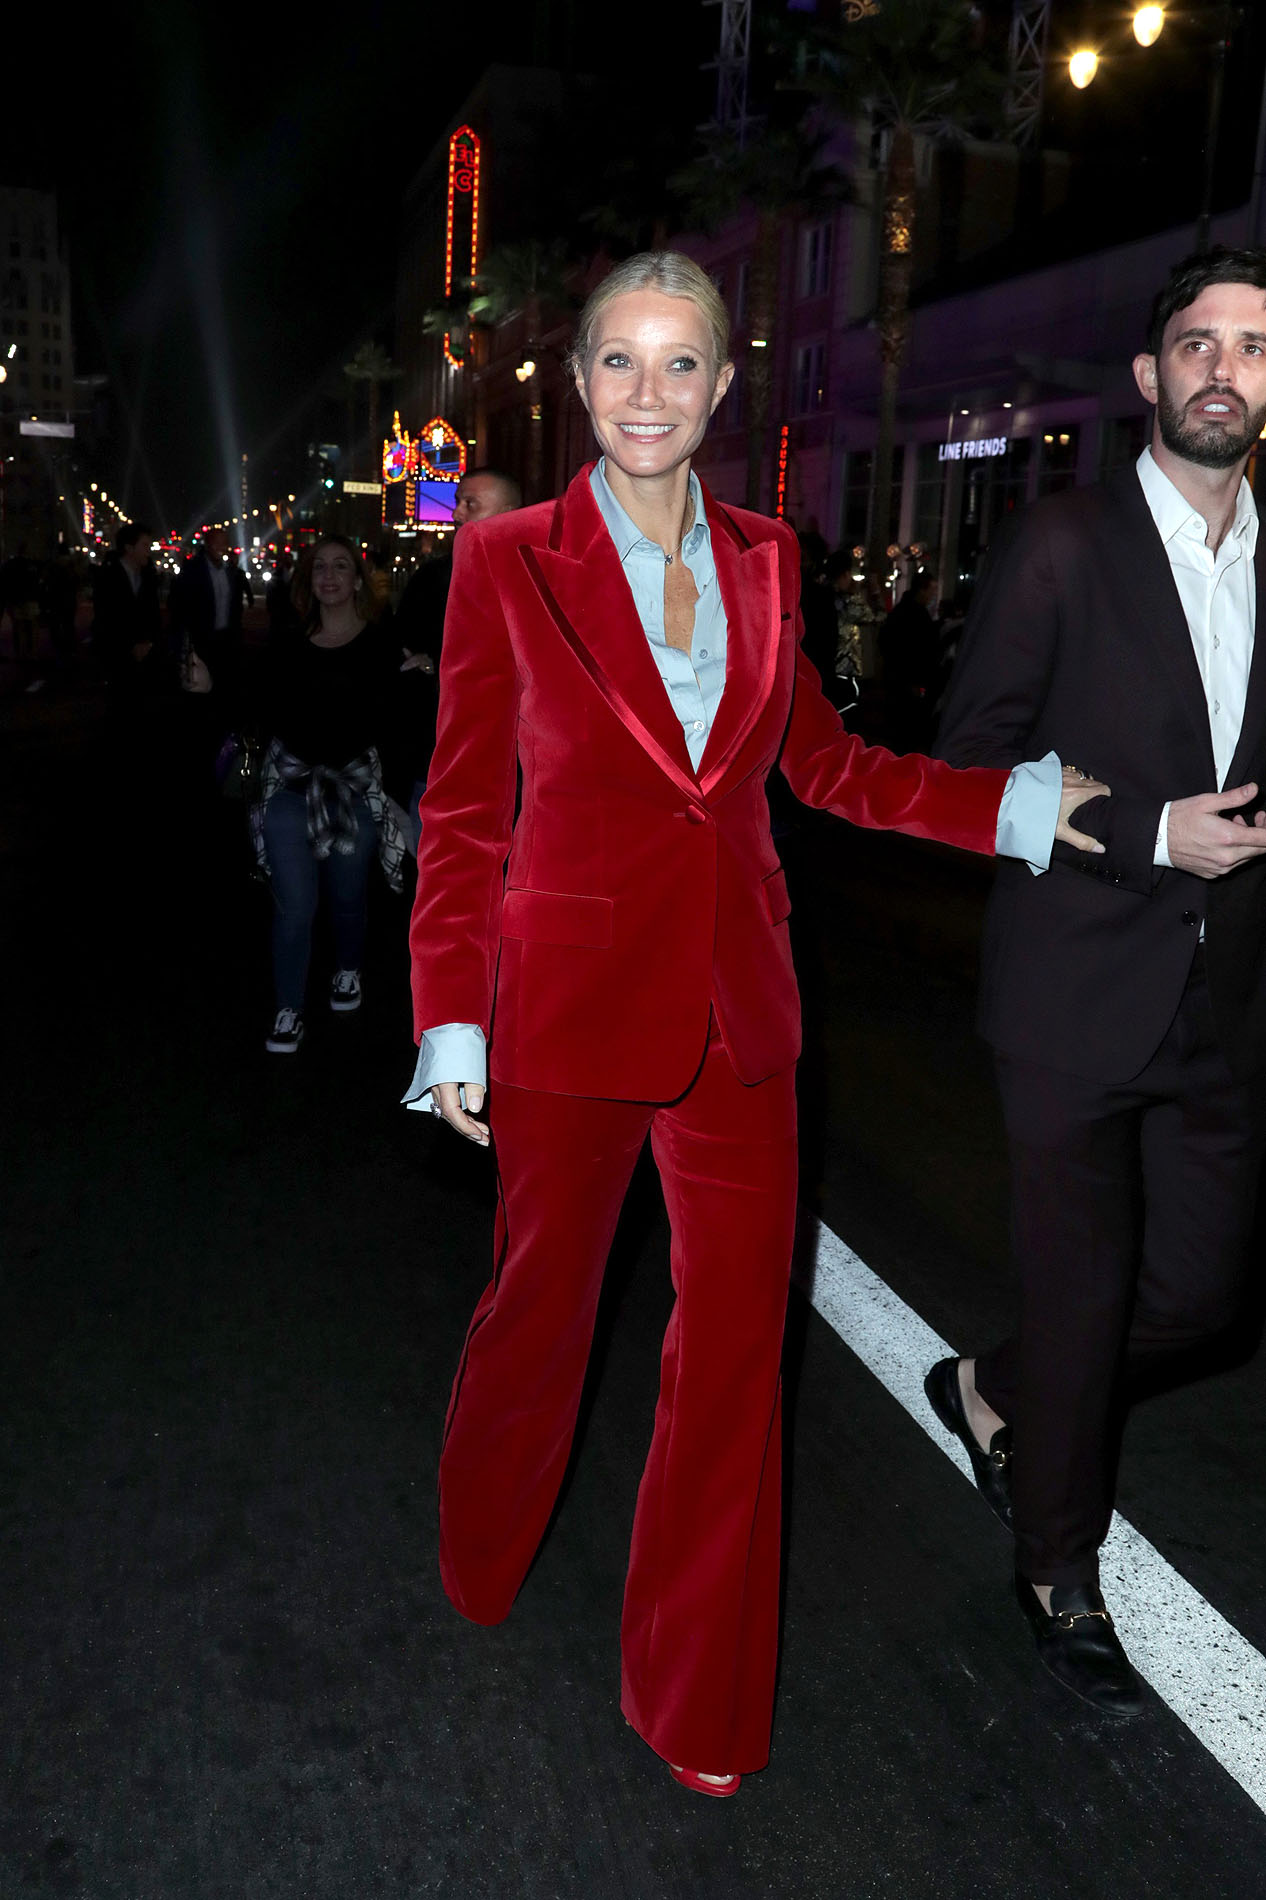 Gwyneth Paltrow Wore Her Iconic Tom Ford Gucci Suit to the Gucci